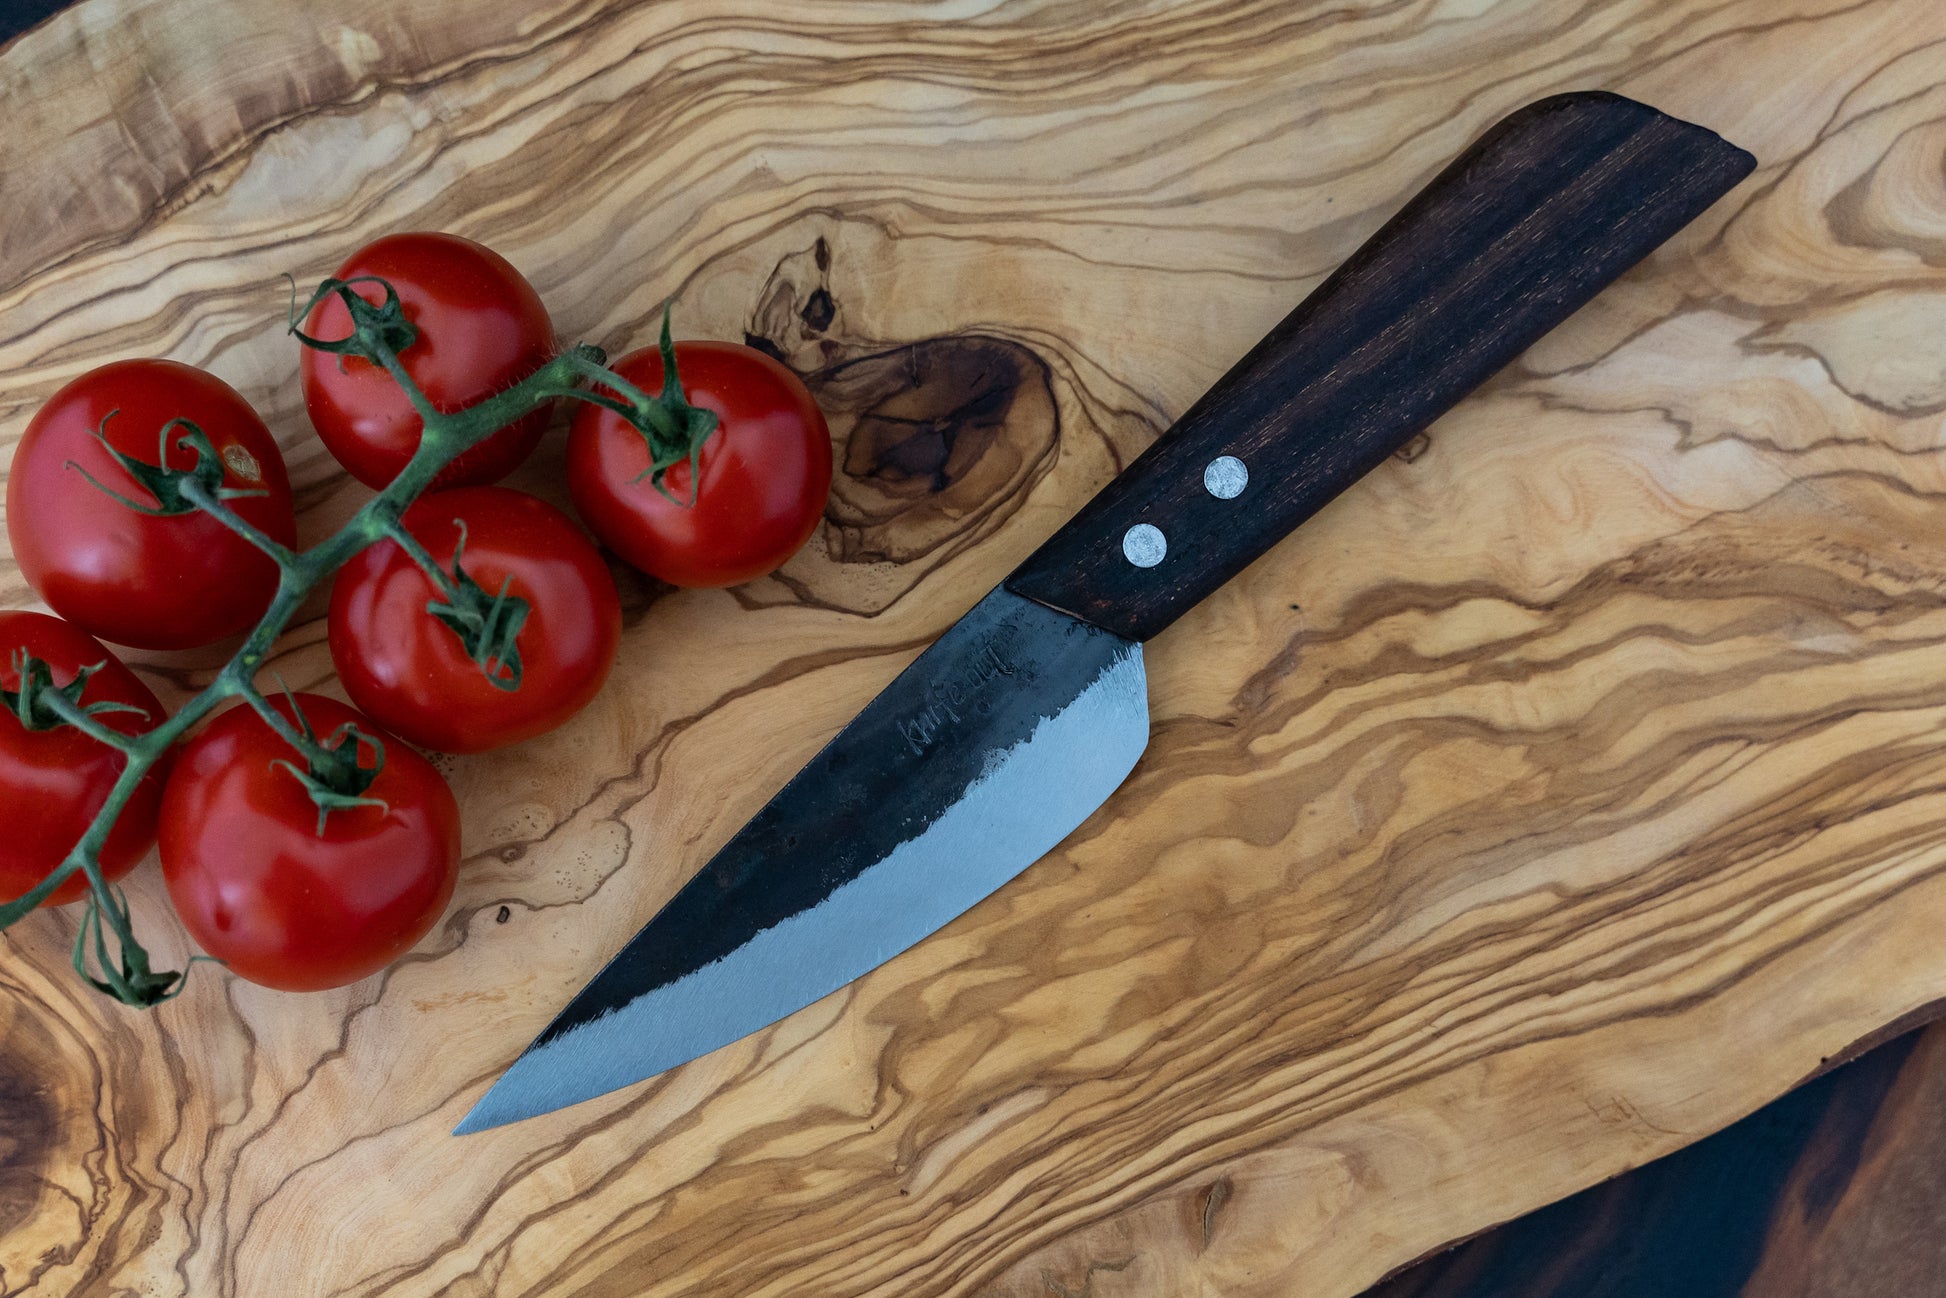 The Fins Rustic Carbon Steel Knife Range – Knife out